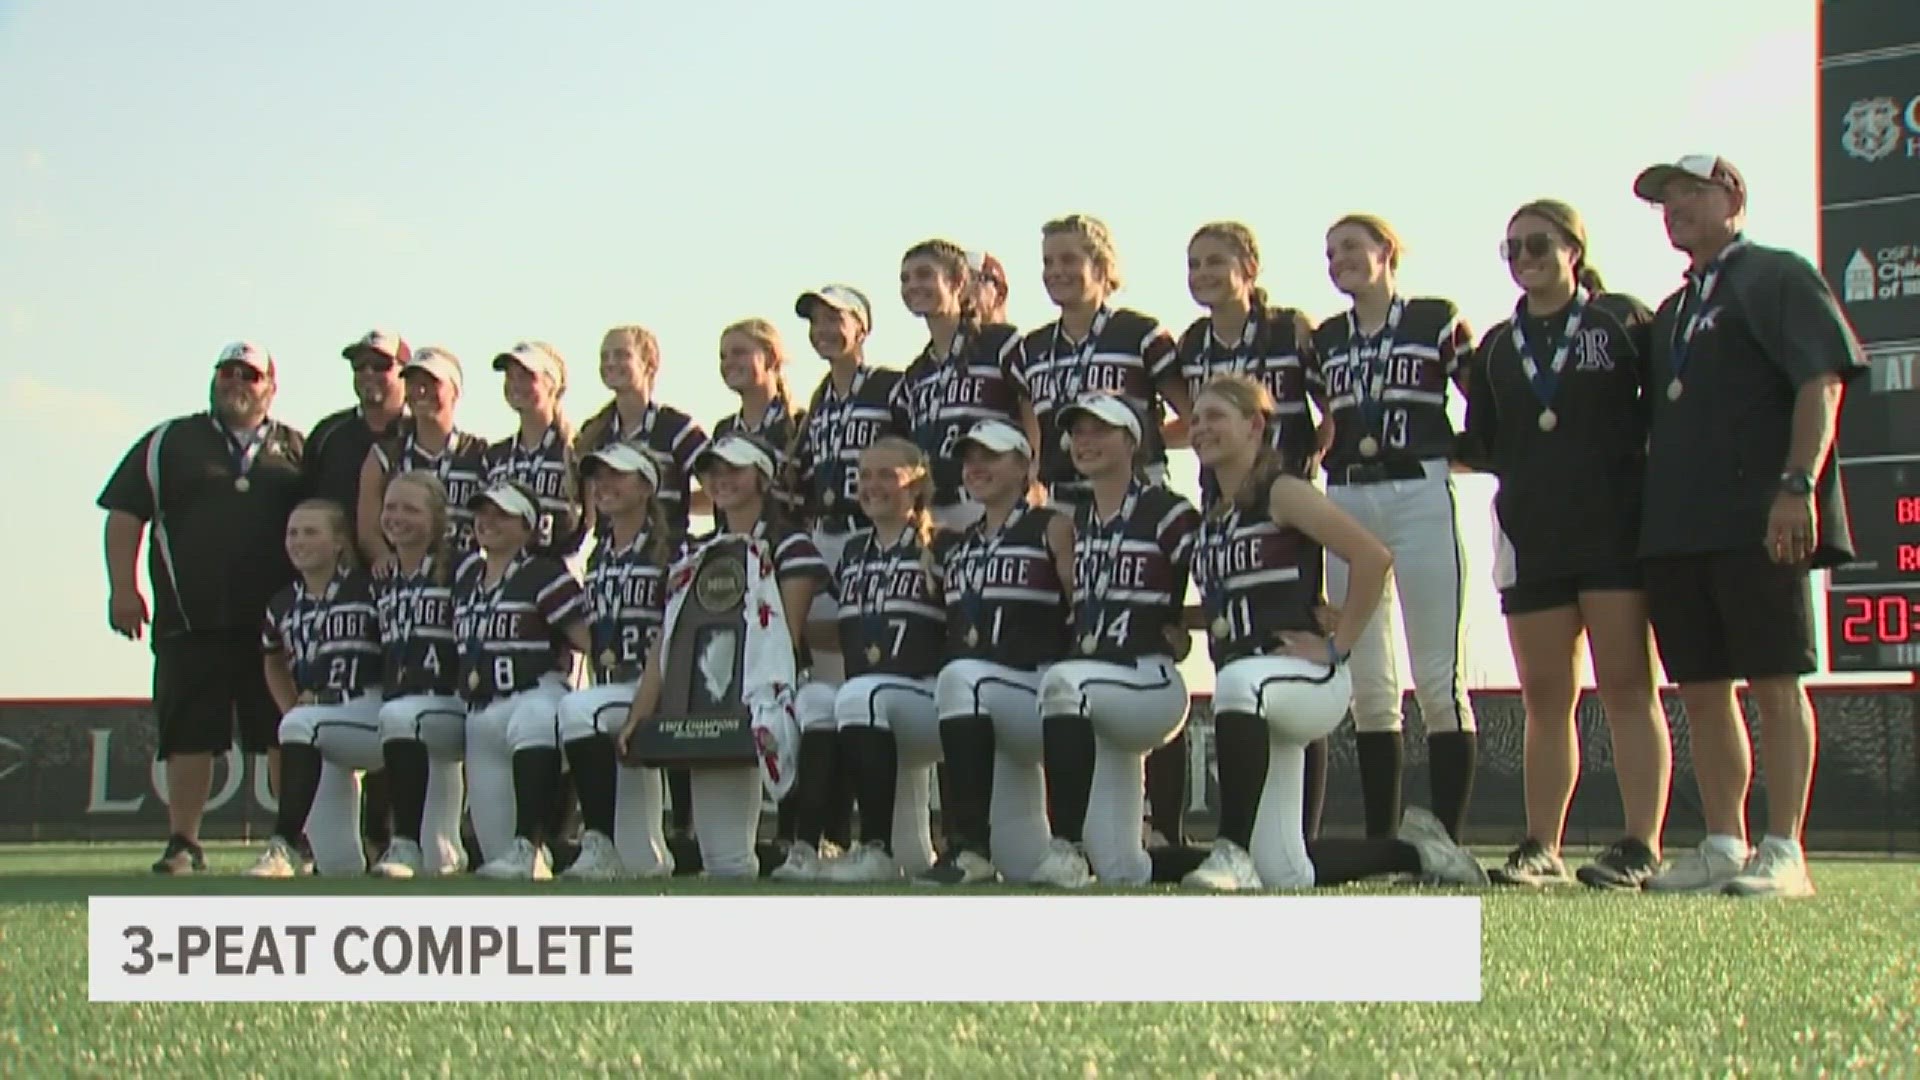 Rockridge Softball becomes the third team to win three straight State Championships. They are 102-1 in the last three years.